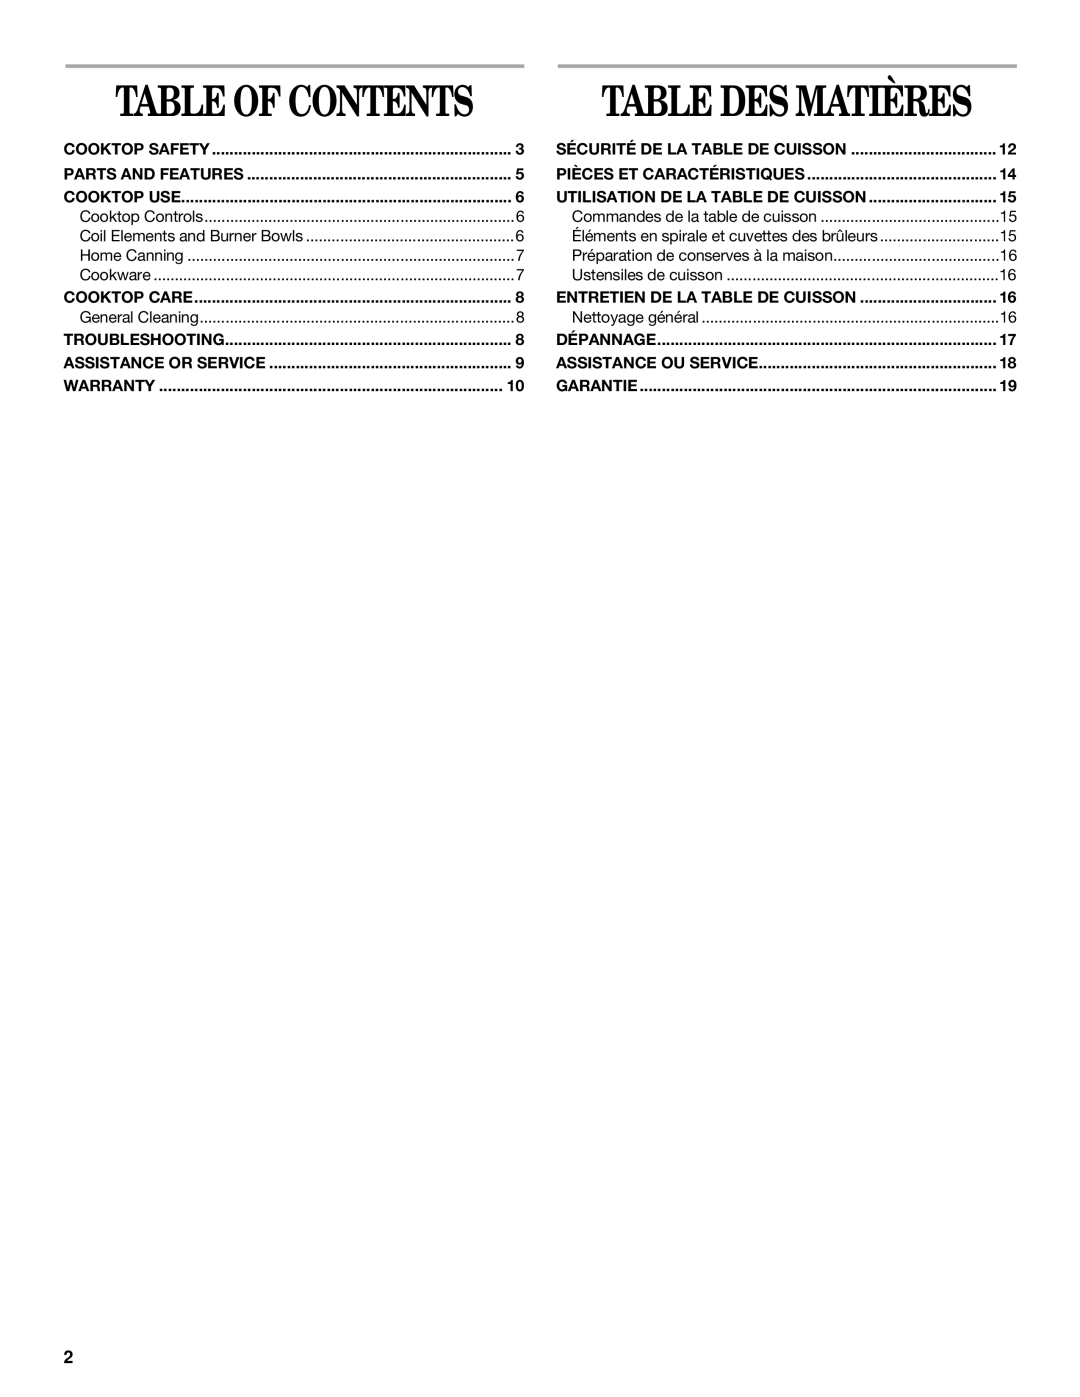 Whirlpool RCS2002 manual Table Of Contents, Table Des Matières 